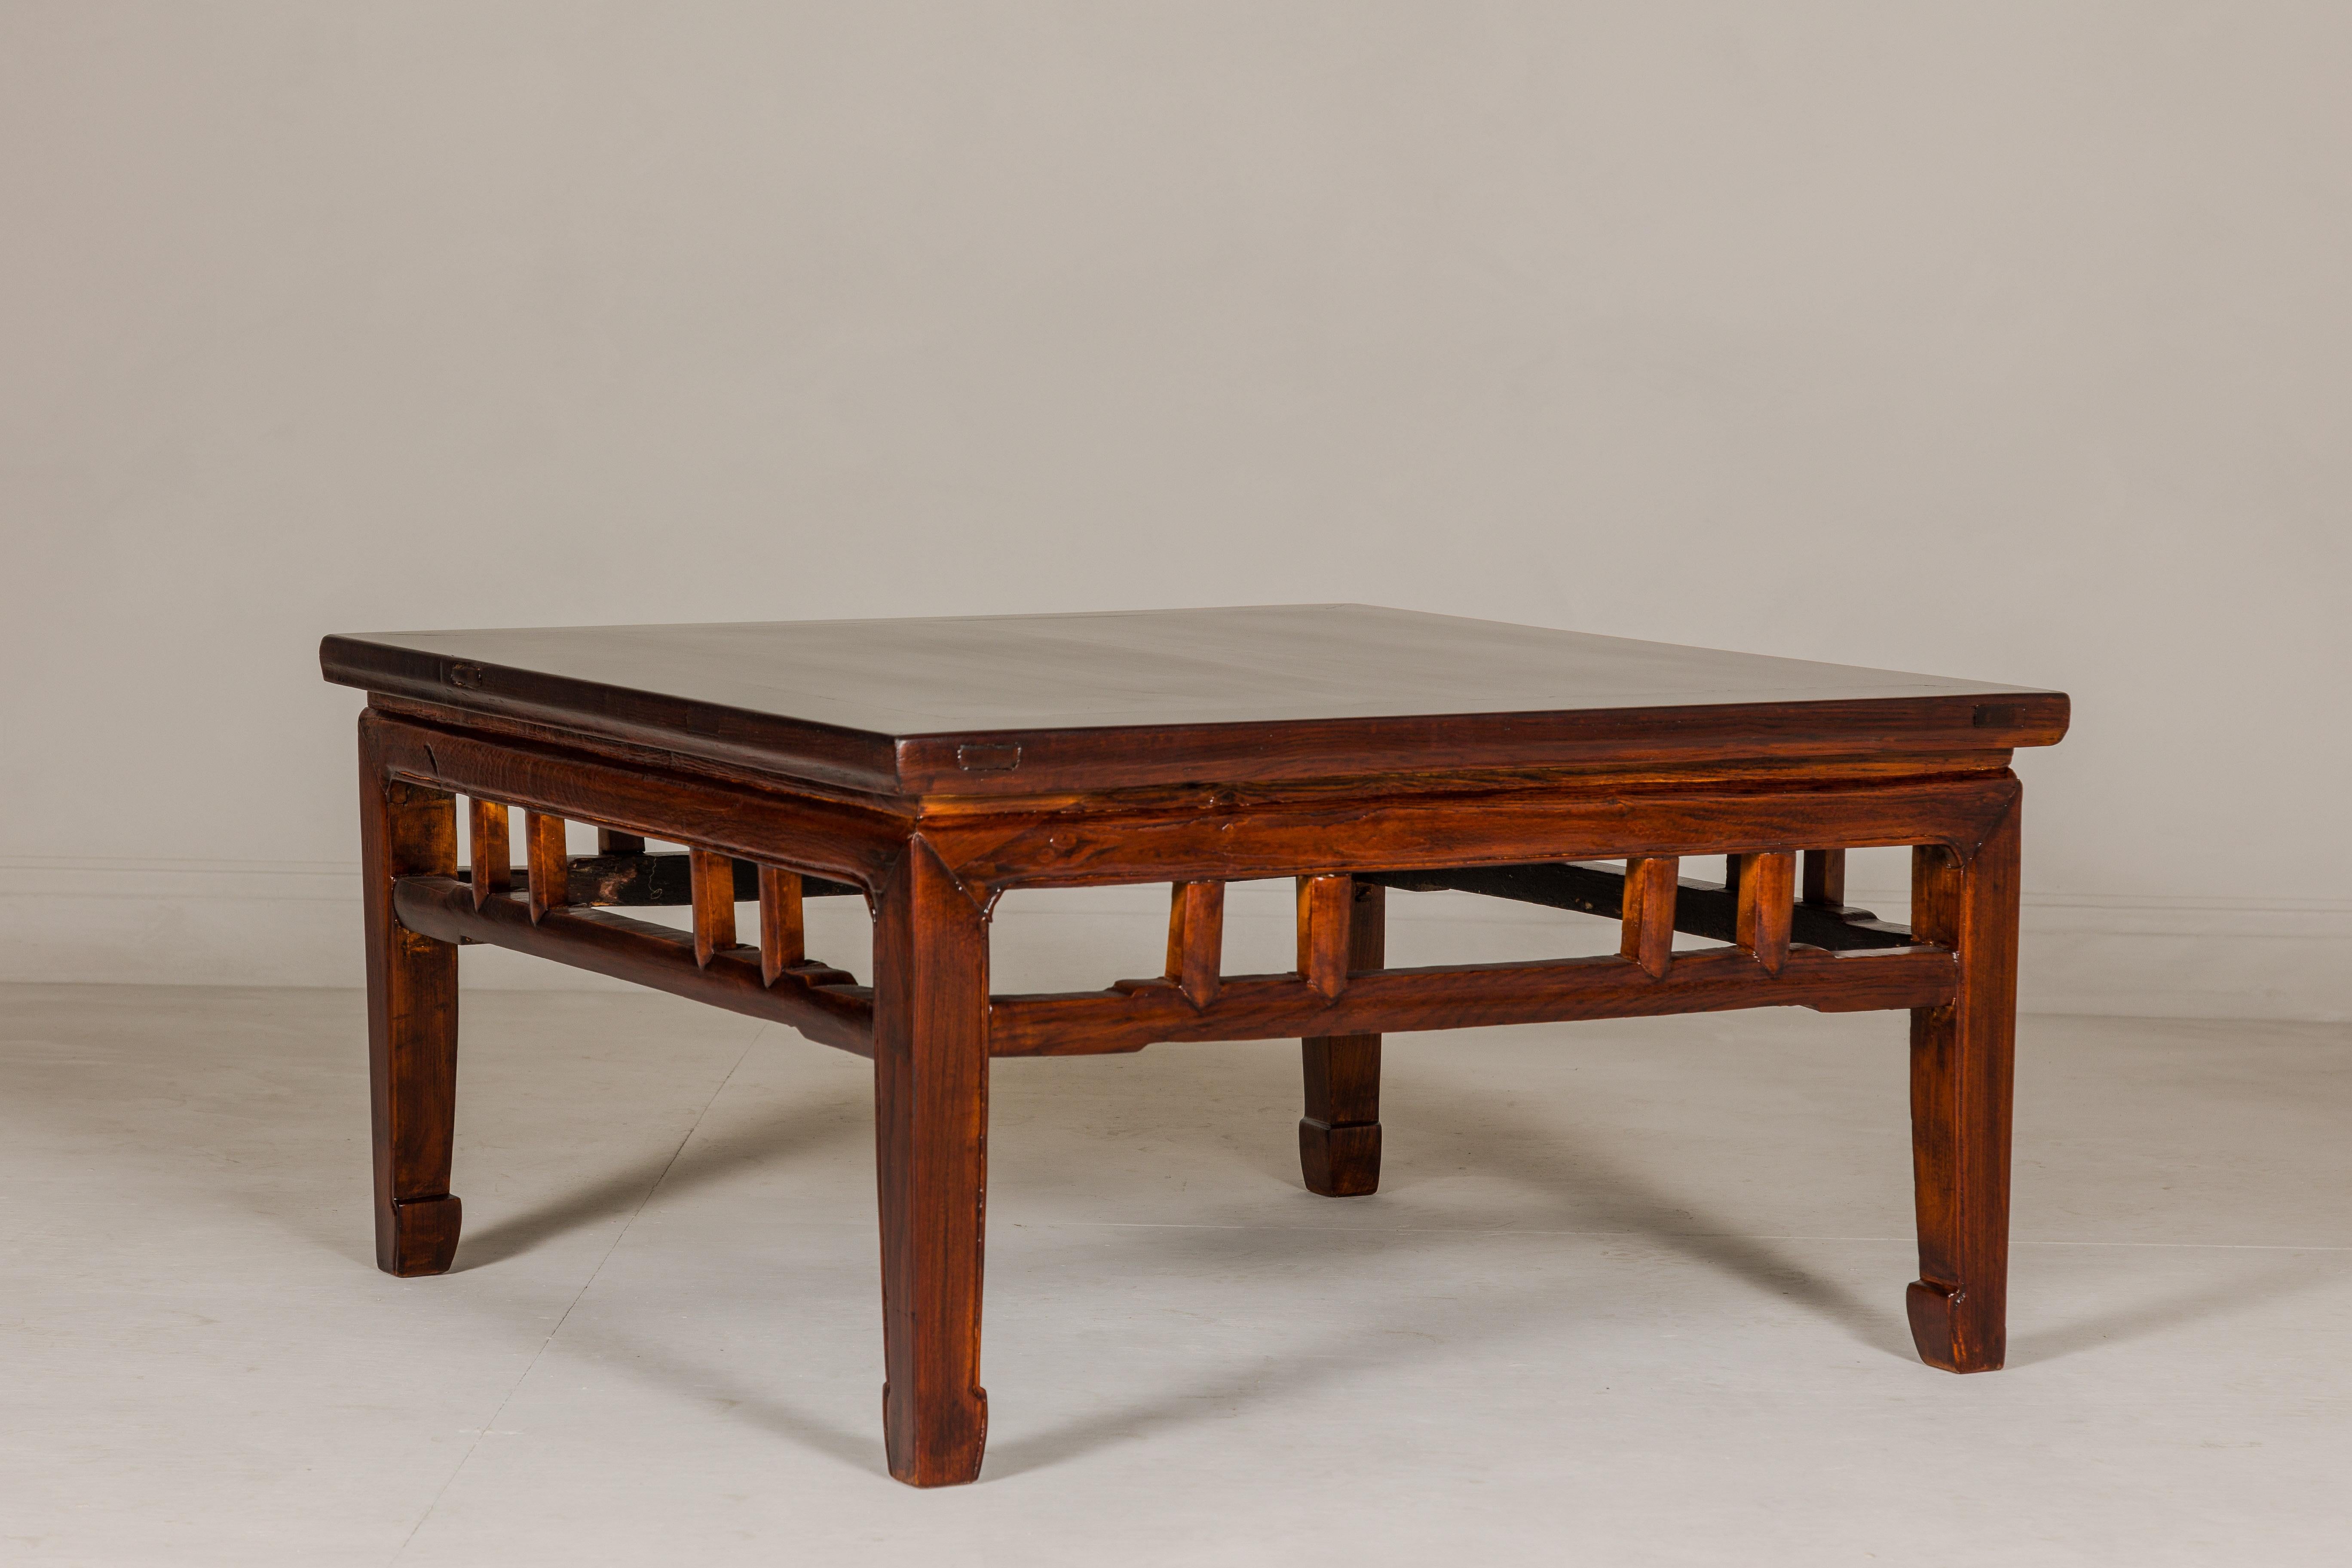 Low Square Coffee Table with Brown Lacquer, Horse Hoof Legs, Humpback Stretcher  For Sale 4